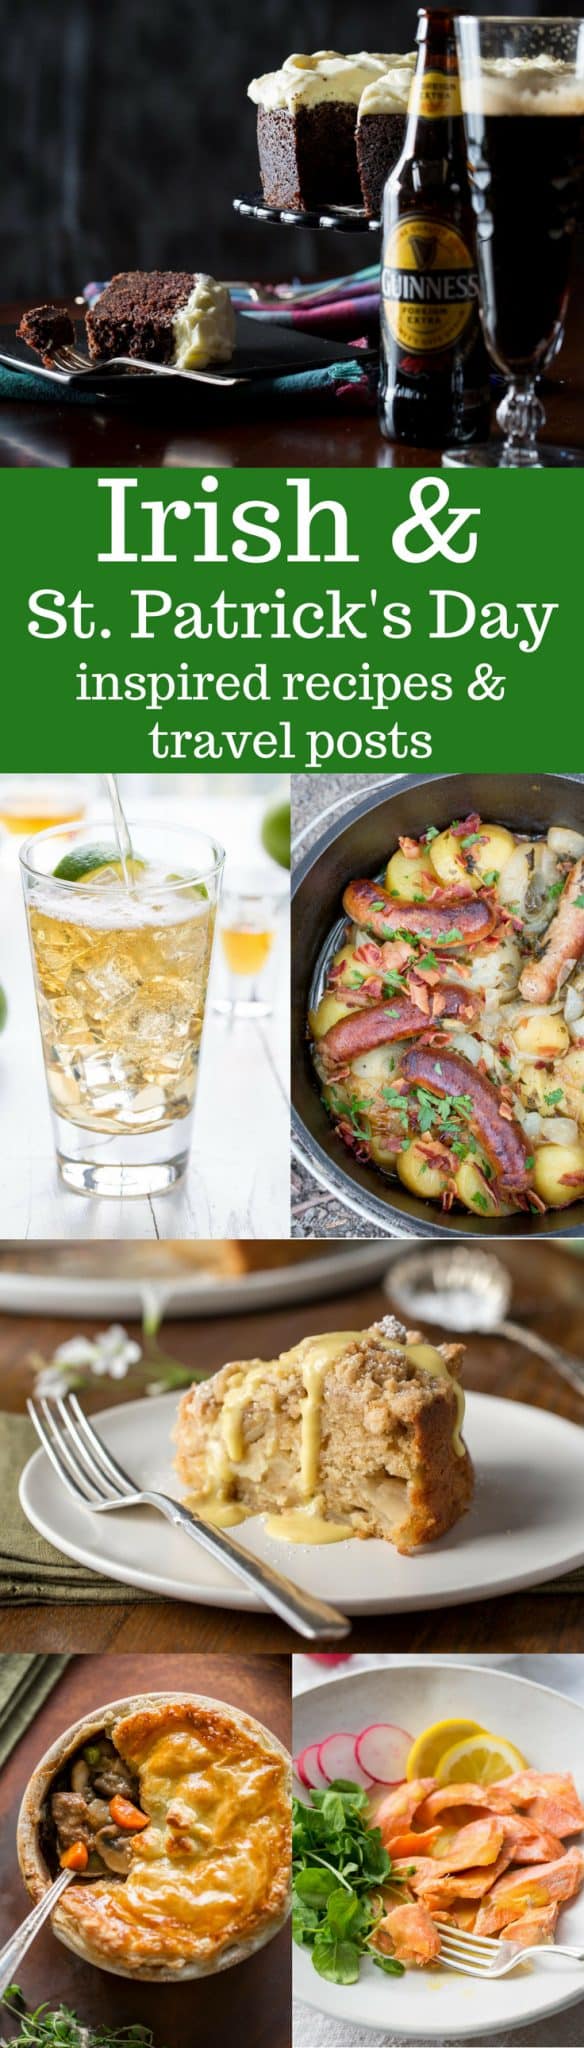 A wonderful roundup of Irish recipes and Travel Posts and St. Patrick's Day inspired fun! from www.savingdessert.com